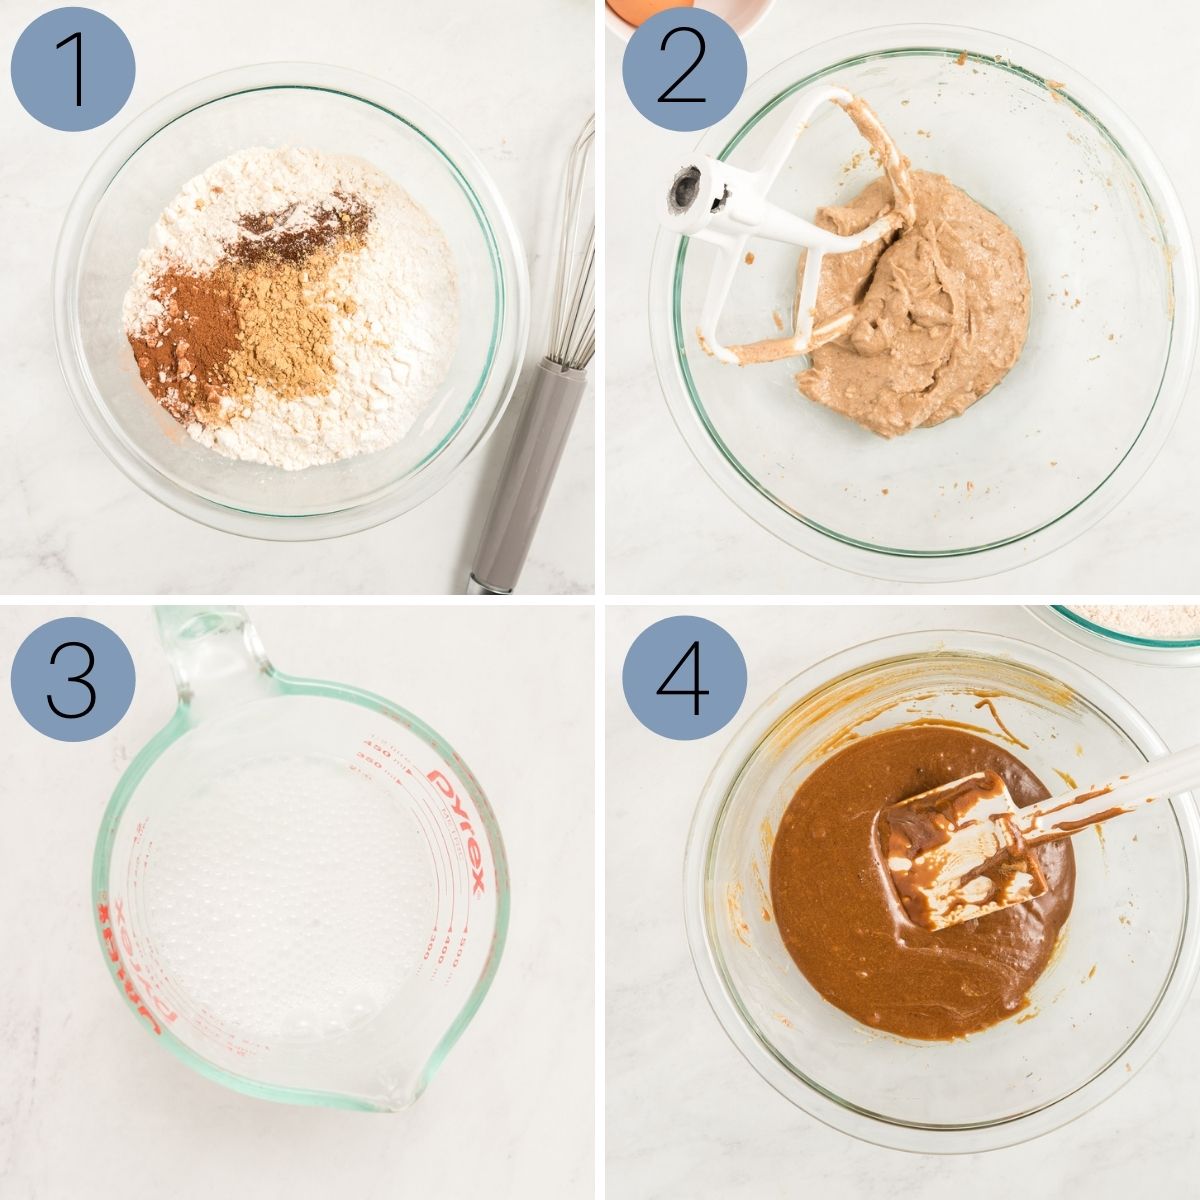 steps 1 to 4 of making the gingerbread cupcake batter